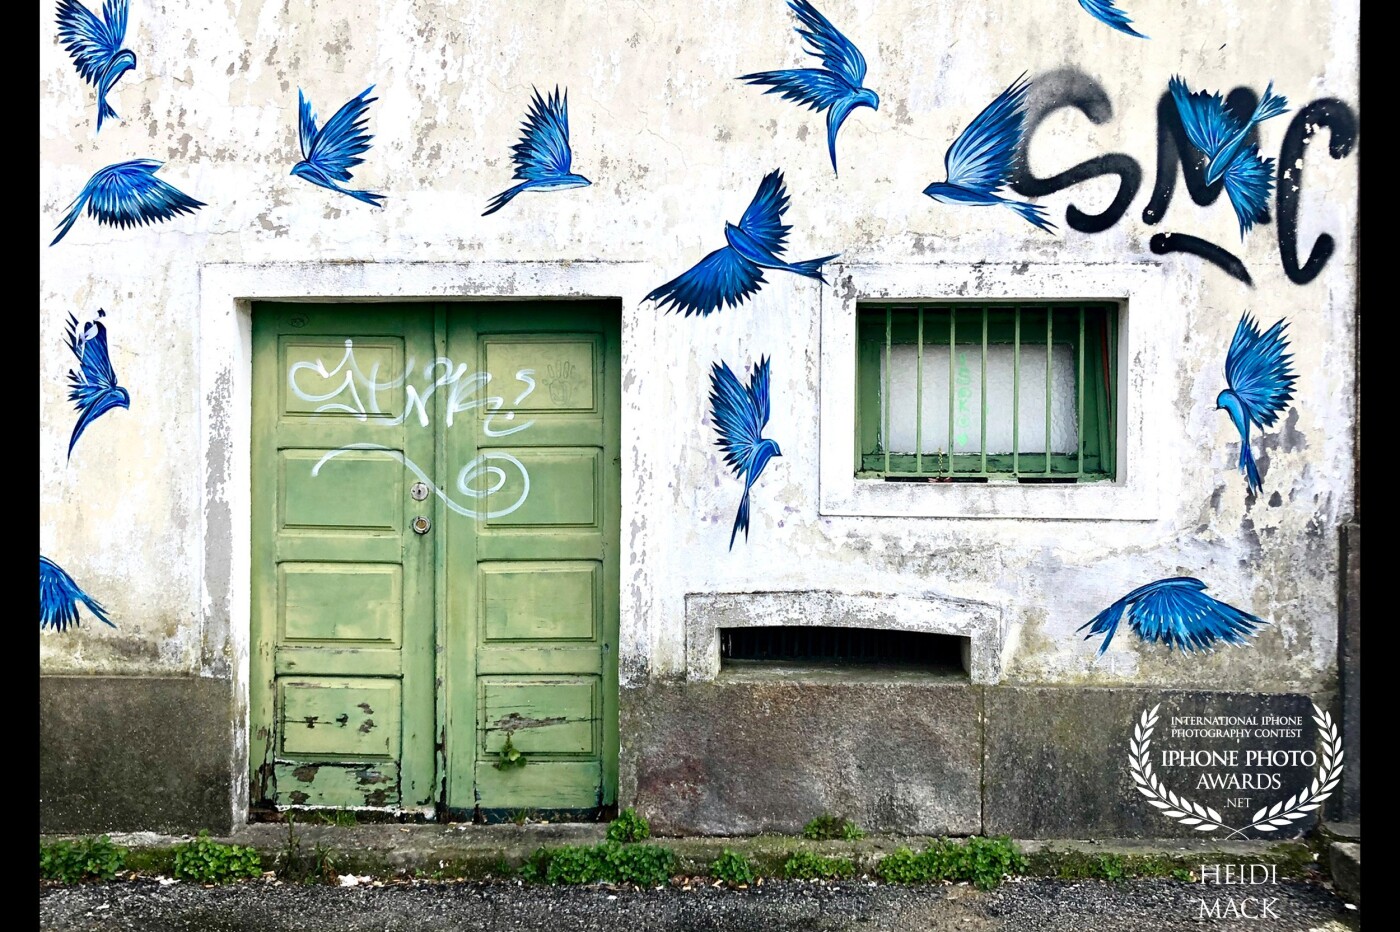 taken in Porto Portugal on my iPhone 8+. I was on a three-month solo journey to deal with some serious grief having lost my best friend of 40 years. When I saw this door and the birds I knew Patti would have loved it. titled: "Patti's Birds".  I went back a month later and the birds had all fallen off and were lying on the ground. I brought one home. 